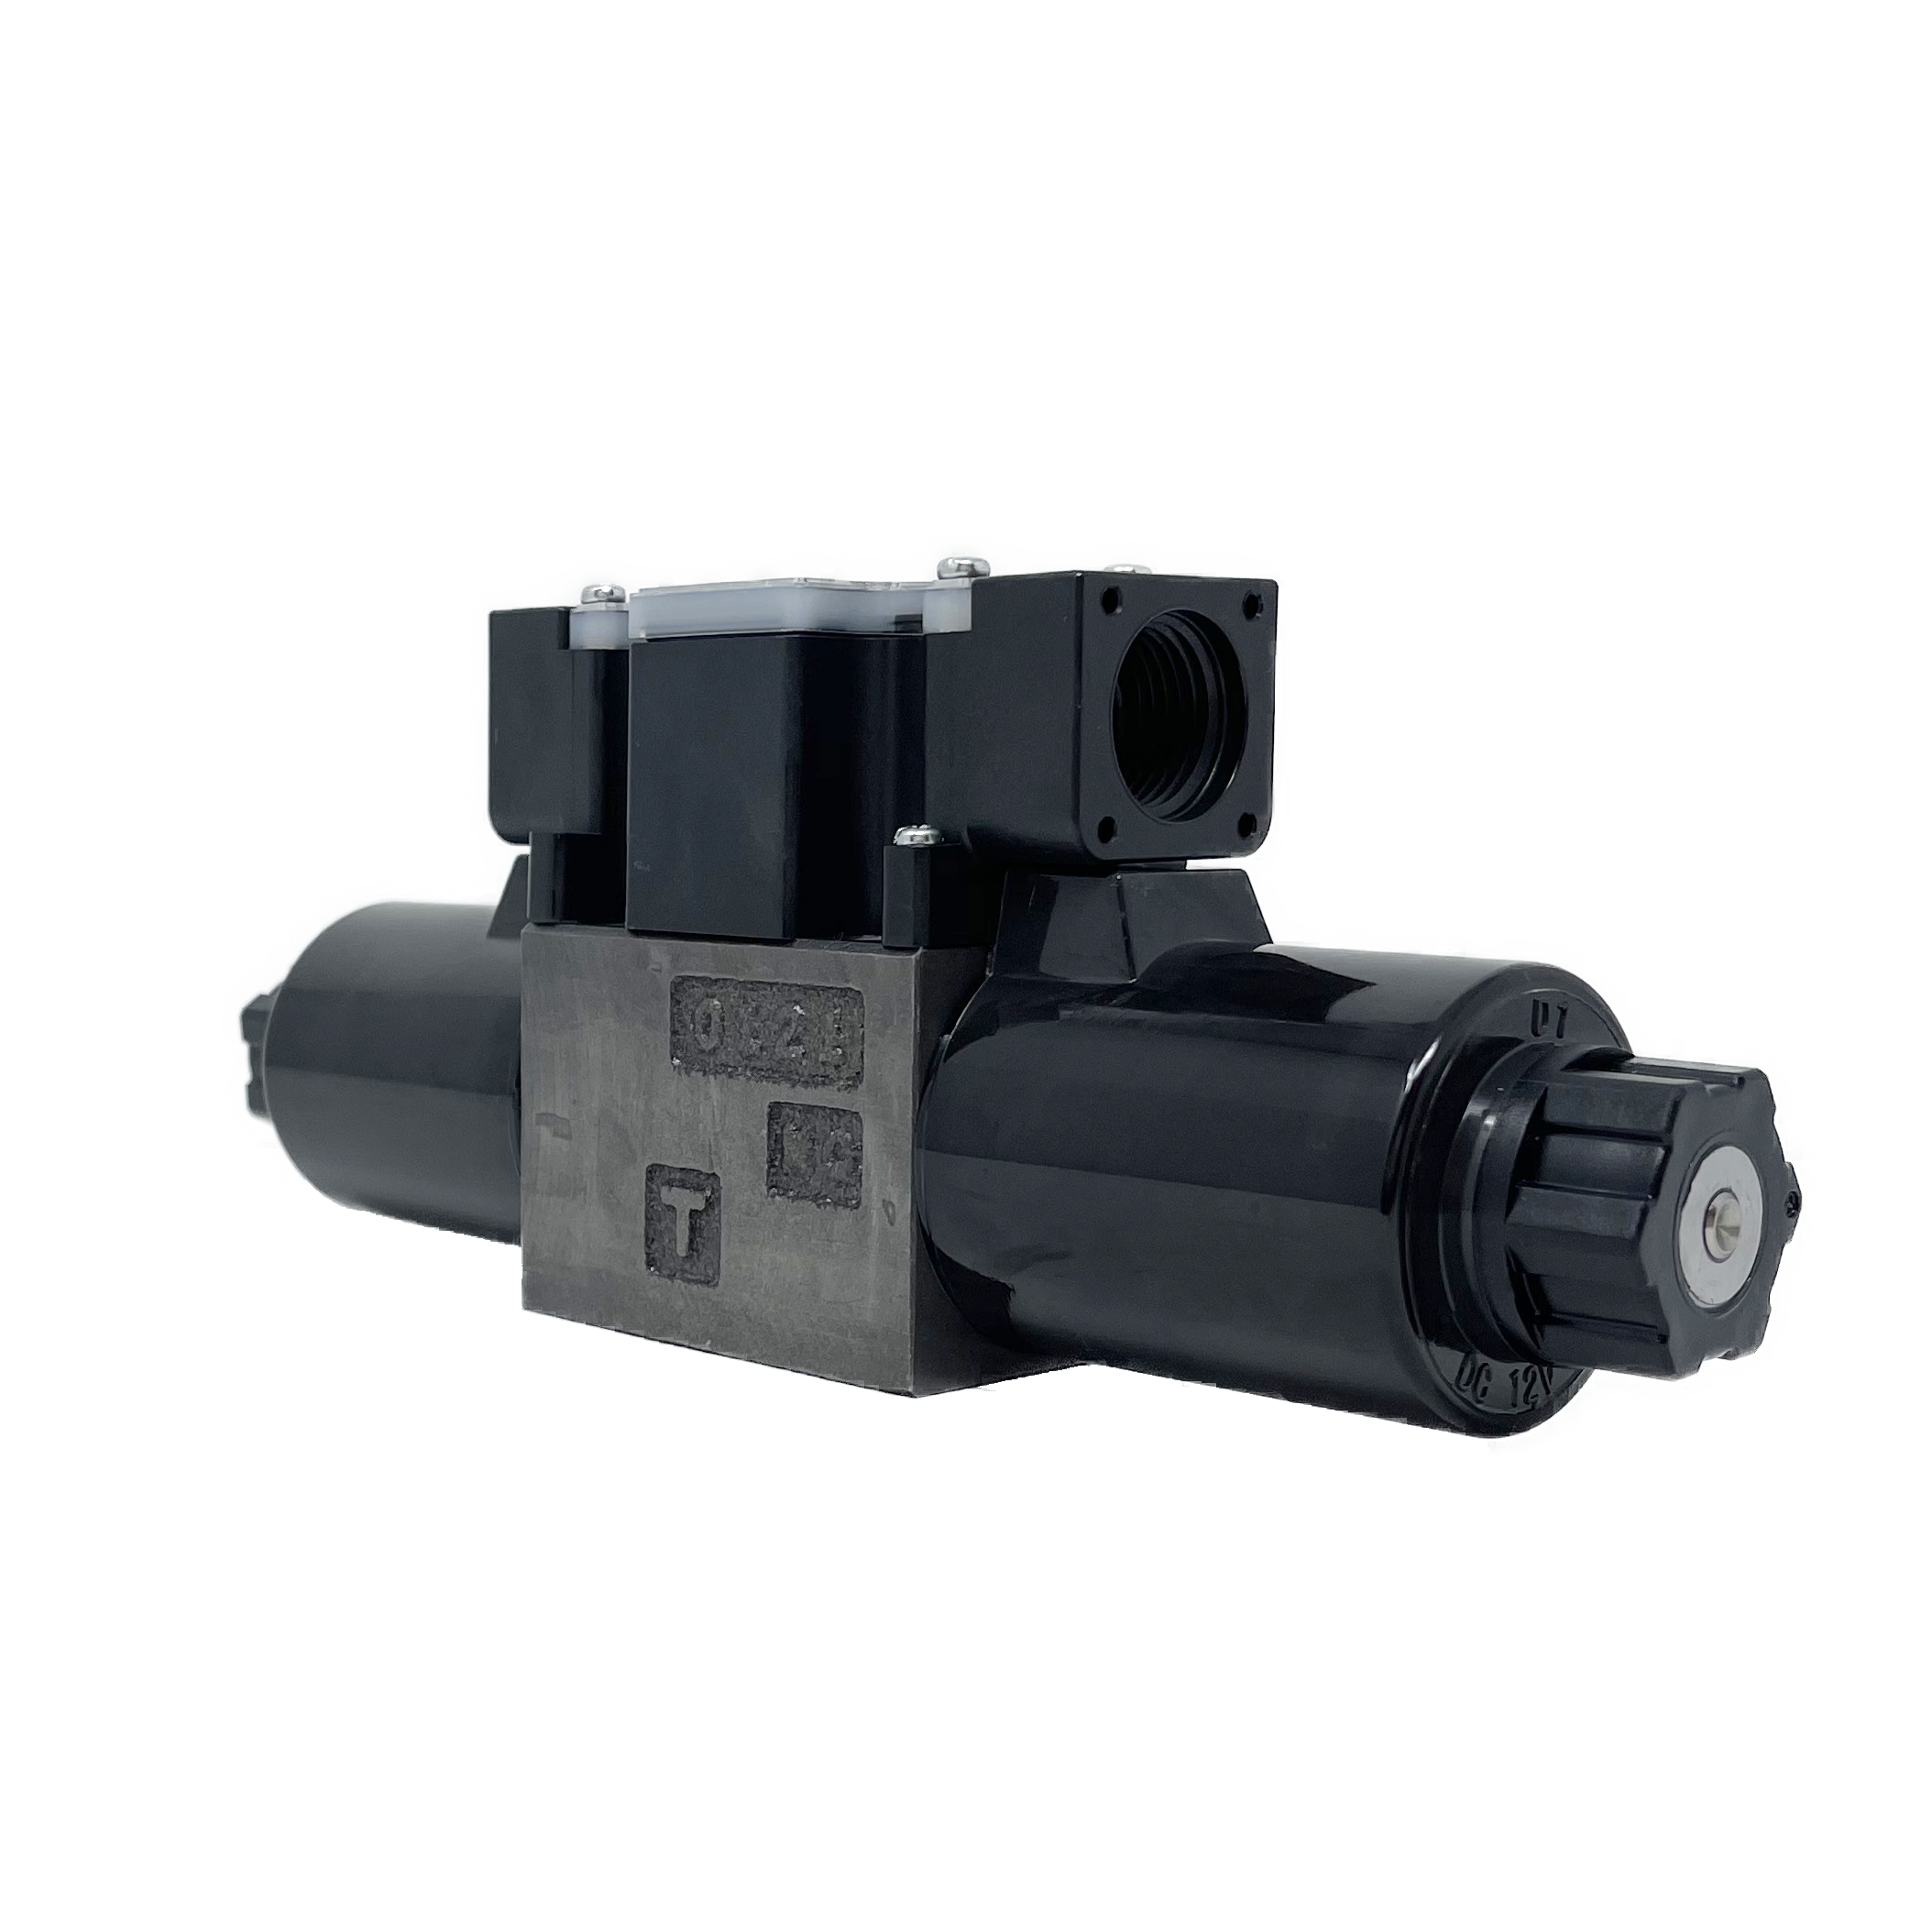 SS-G01-C5-GR-D2-E31 : Nachi Solenoid Valve, 3P4W, D03 (NG6), 26.4GPM, 5075psi, All Ports Blocked Neutral, 24 VDC, Surgeless Type, Wiring Box with Lights